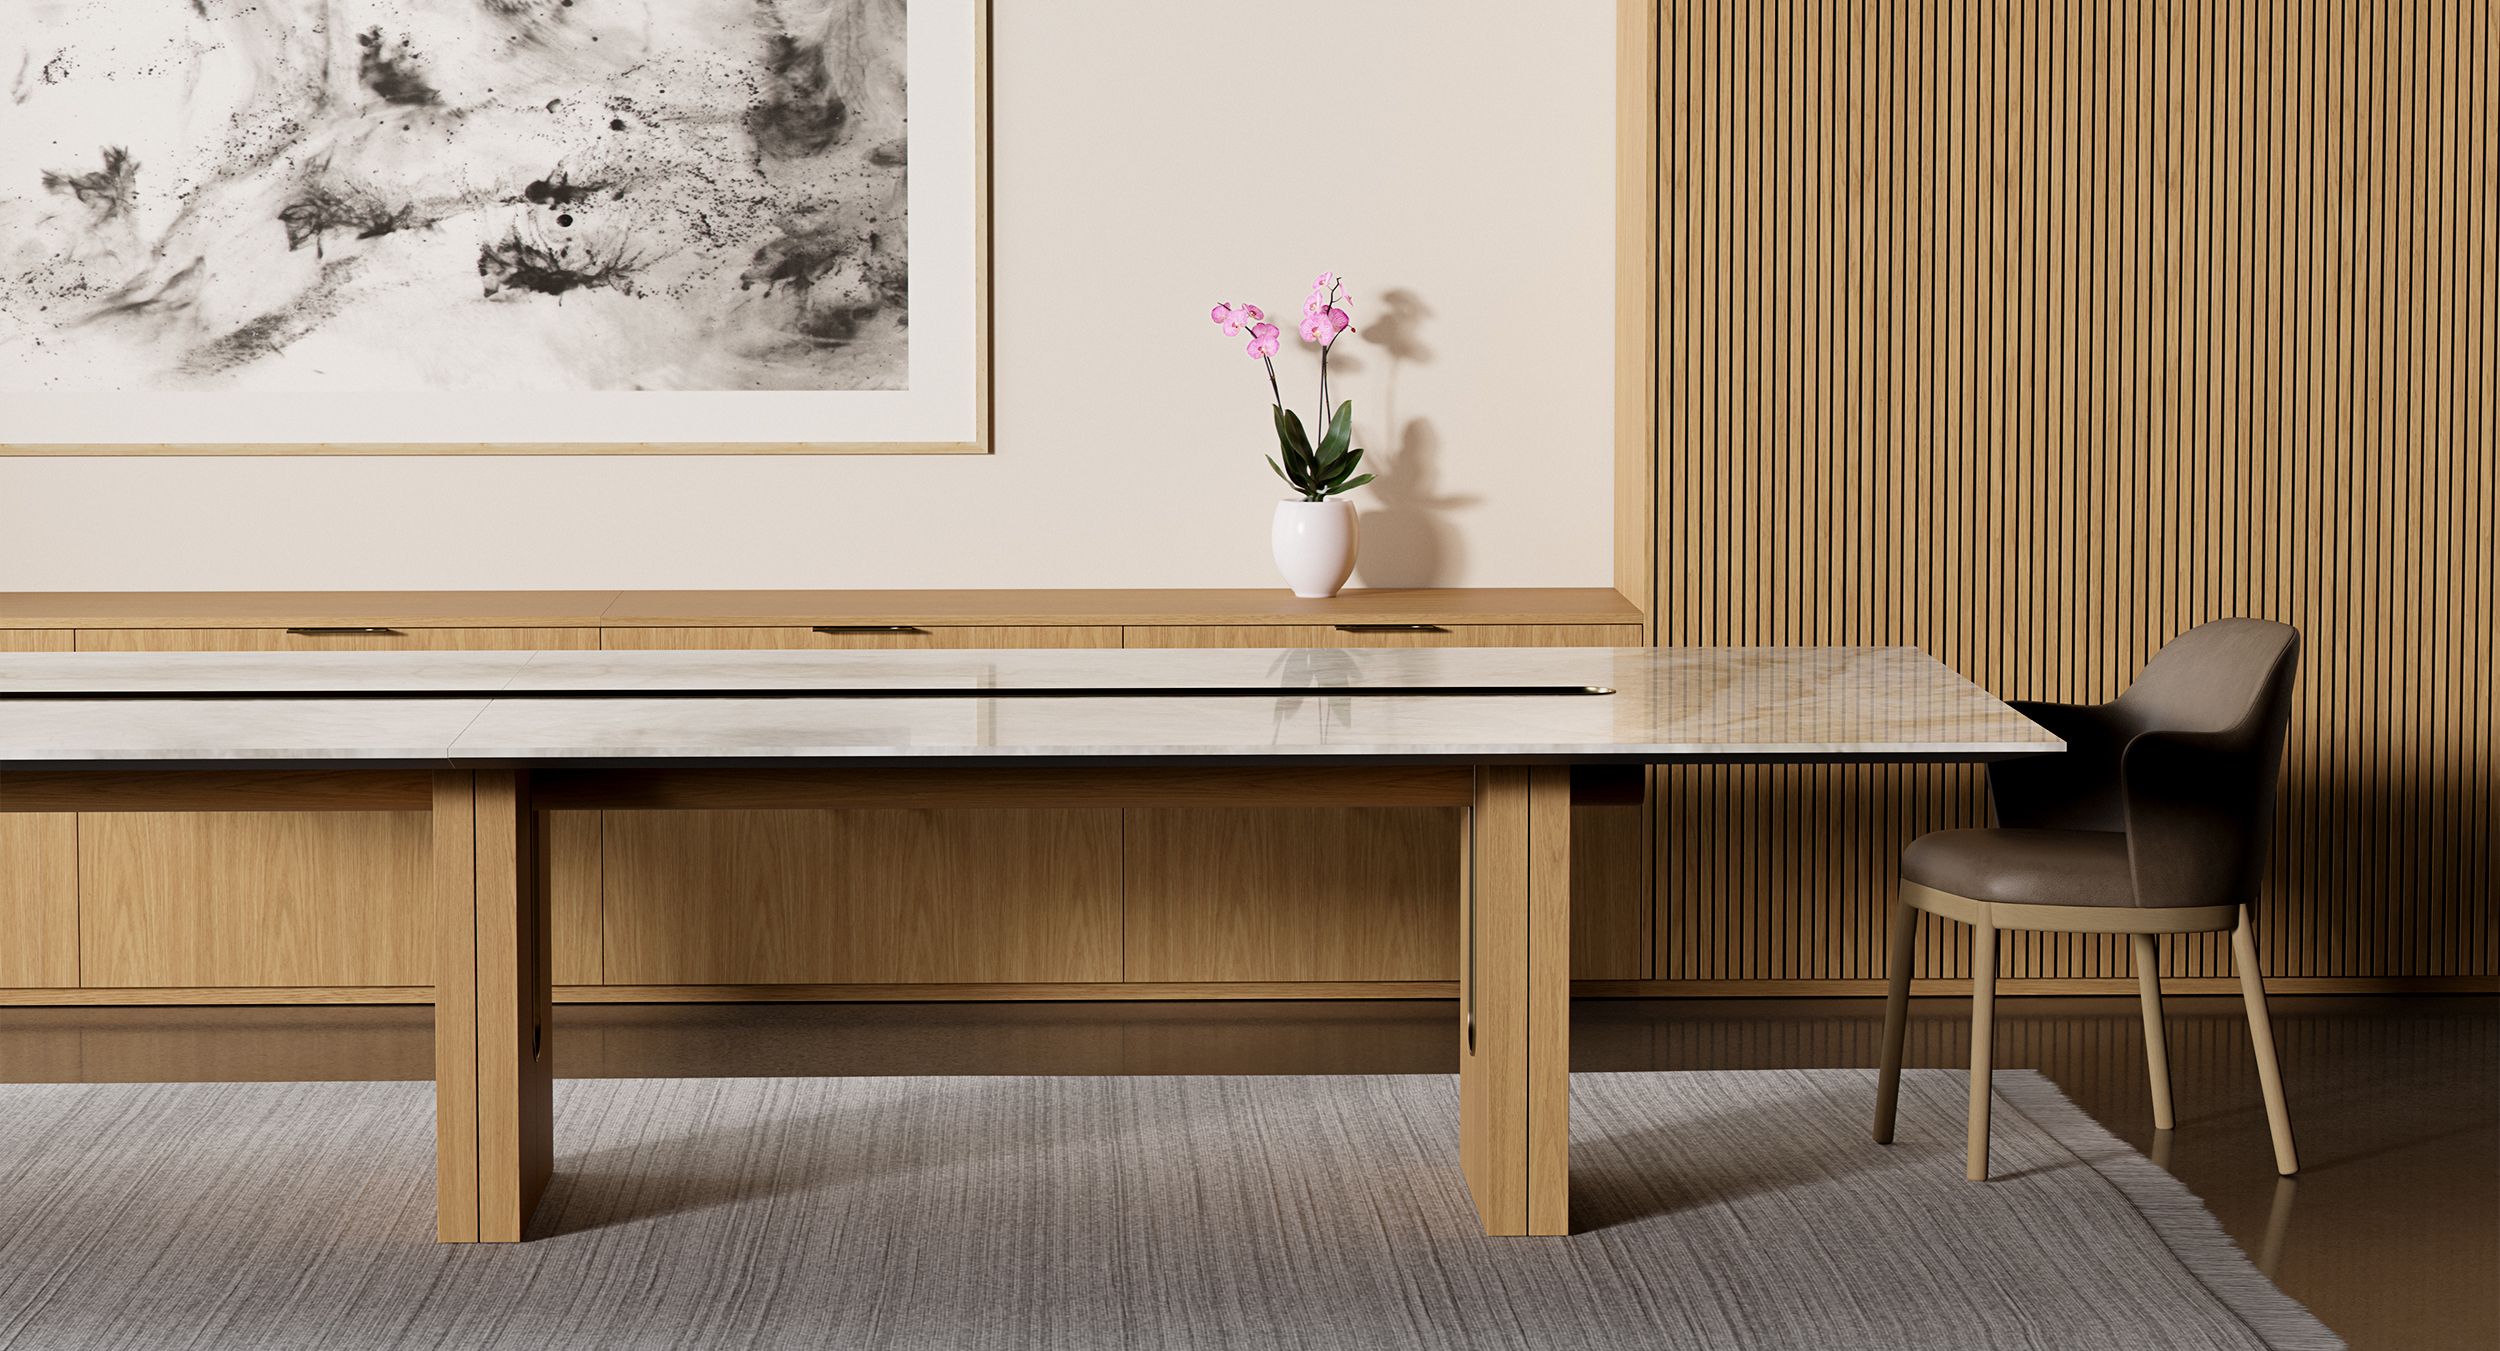 Beautifully crafted tables blend luxurious natural materials with modern lines to create calm and welcoming spaces to meet today’s technology needs.